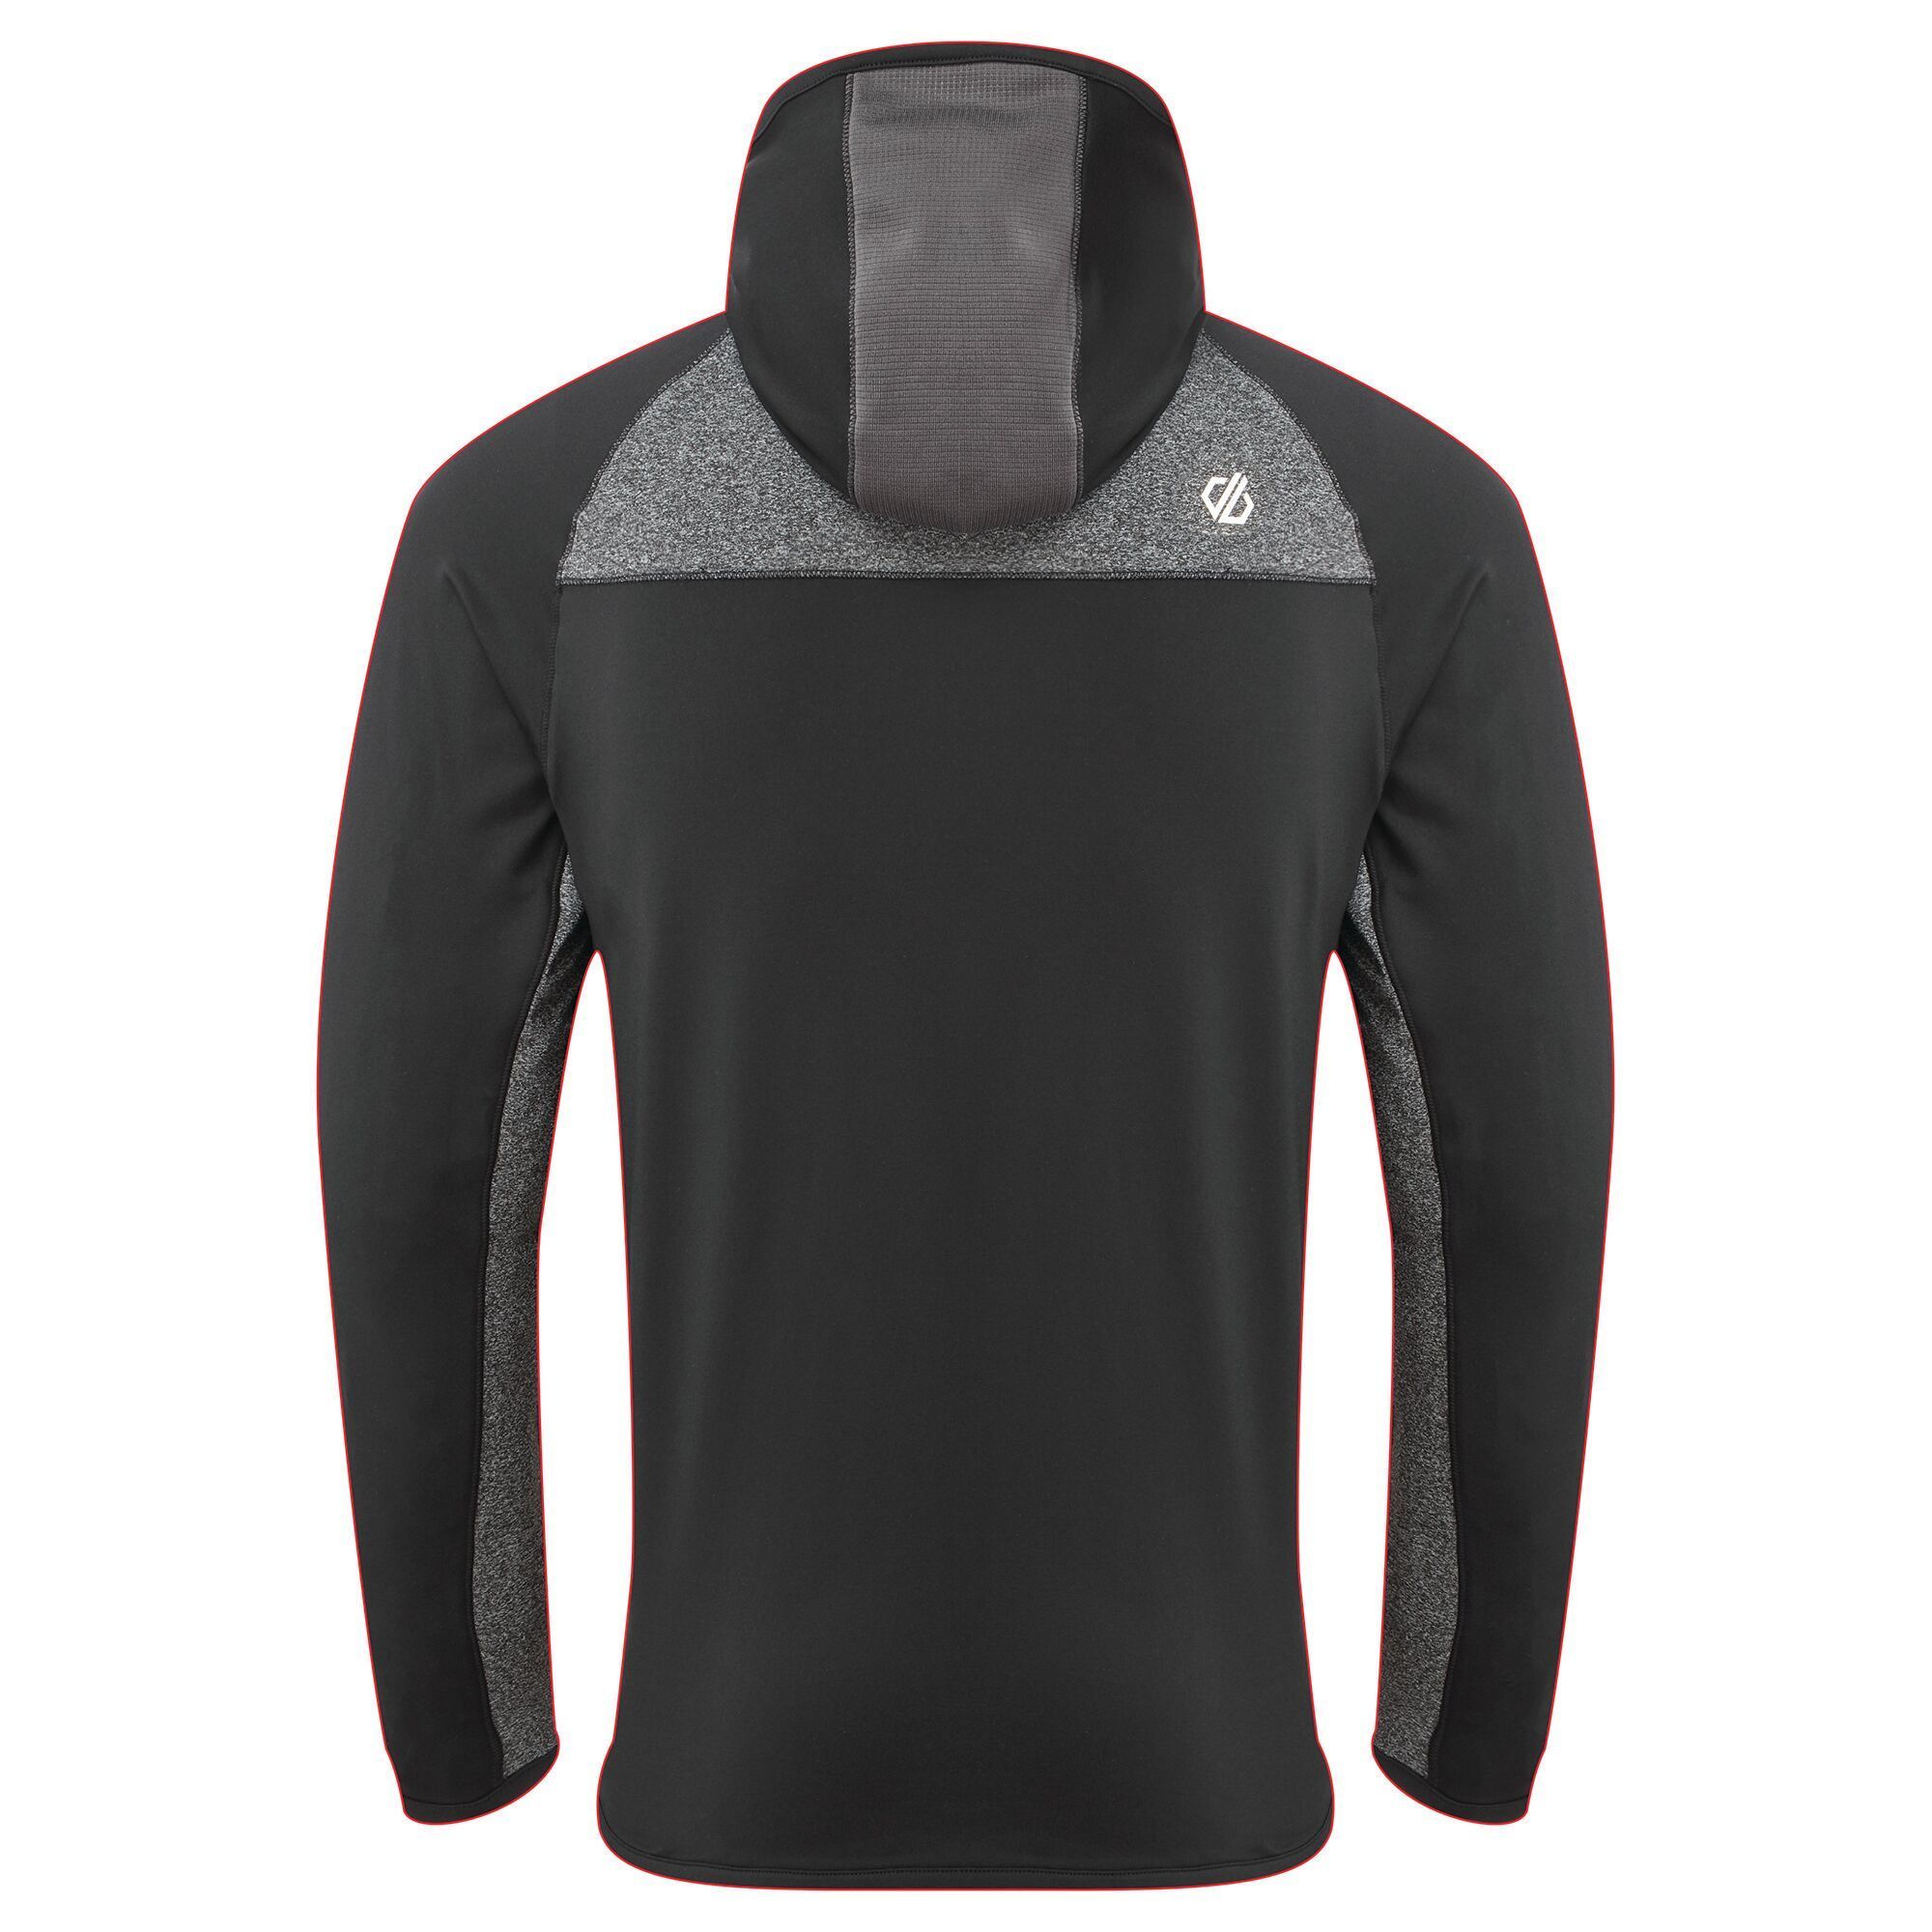 Material: 100% polyester. Lightweight Ilus Core warm waffle grid backed stretch fabric. Quick drying. Grown on hood. Full length zip. Inner zip & chin guard. 2 x lower zip pockets. Stretch binding to hood opening, cuffs and hem.